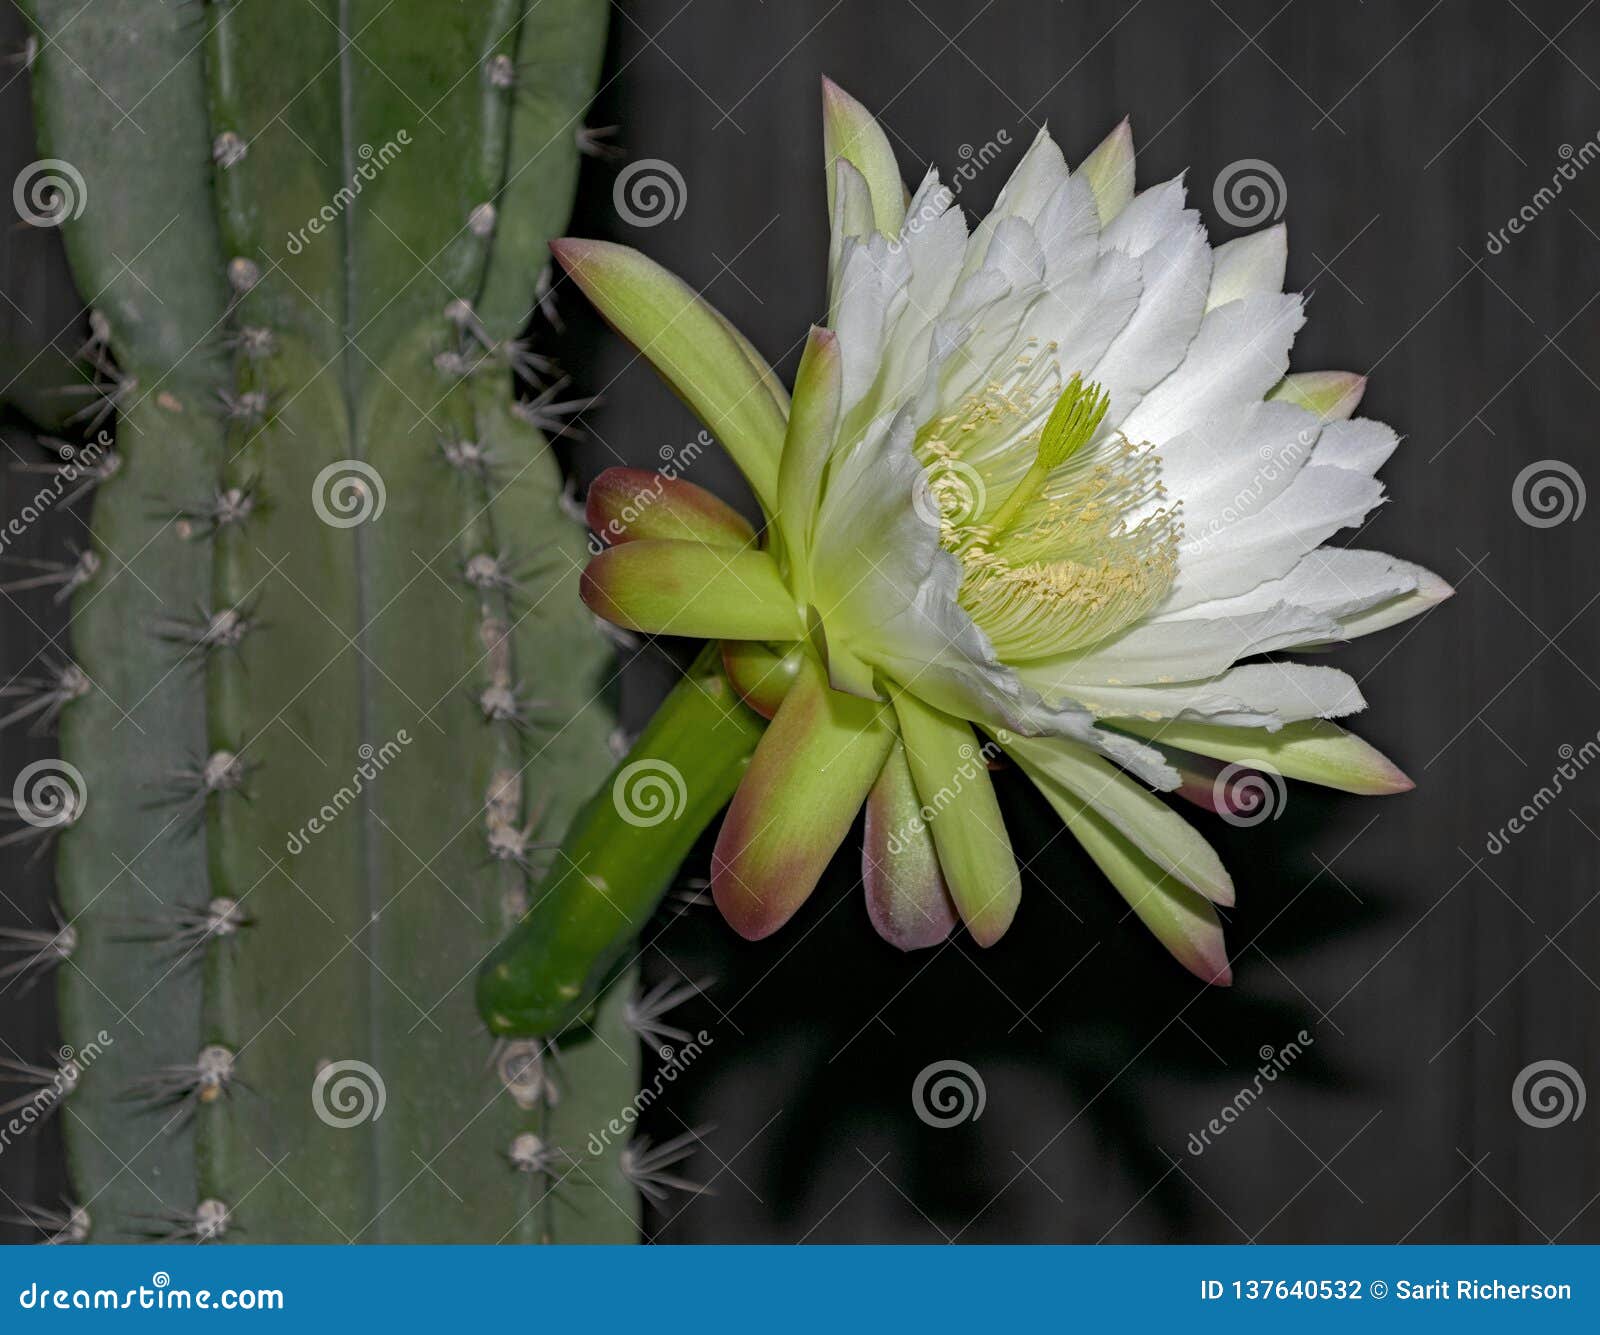 White Night Blooming Cereus Cactus Flower and Plant Stock Photo - Image of  botany, closeup: 137640532